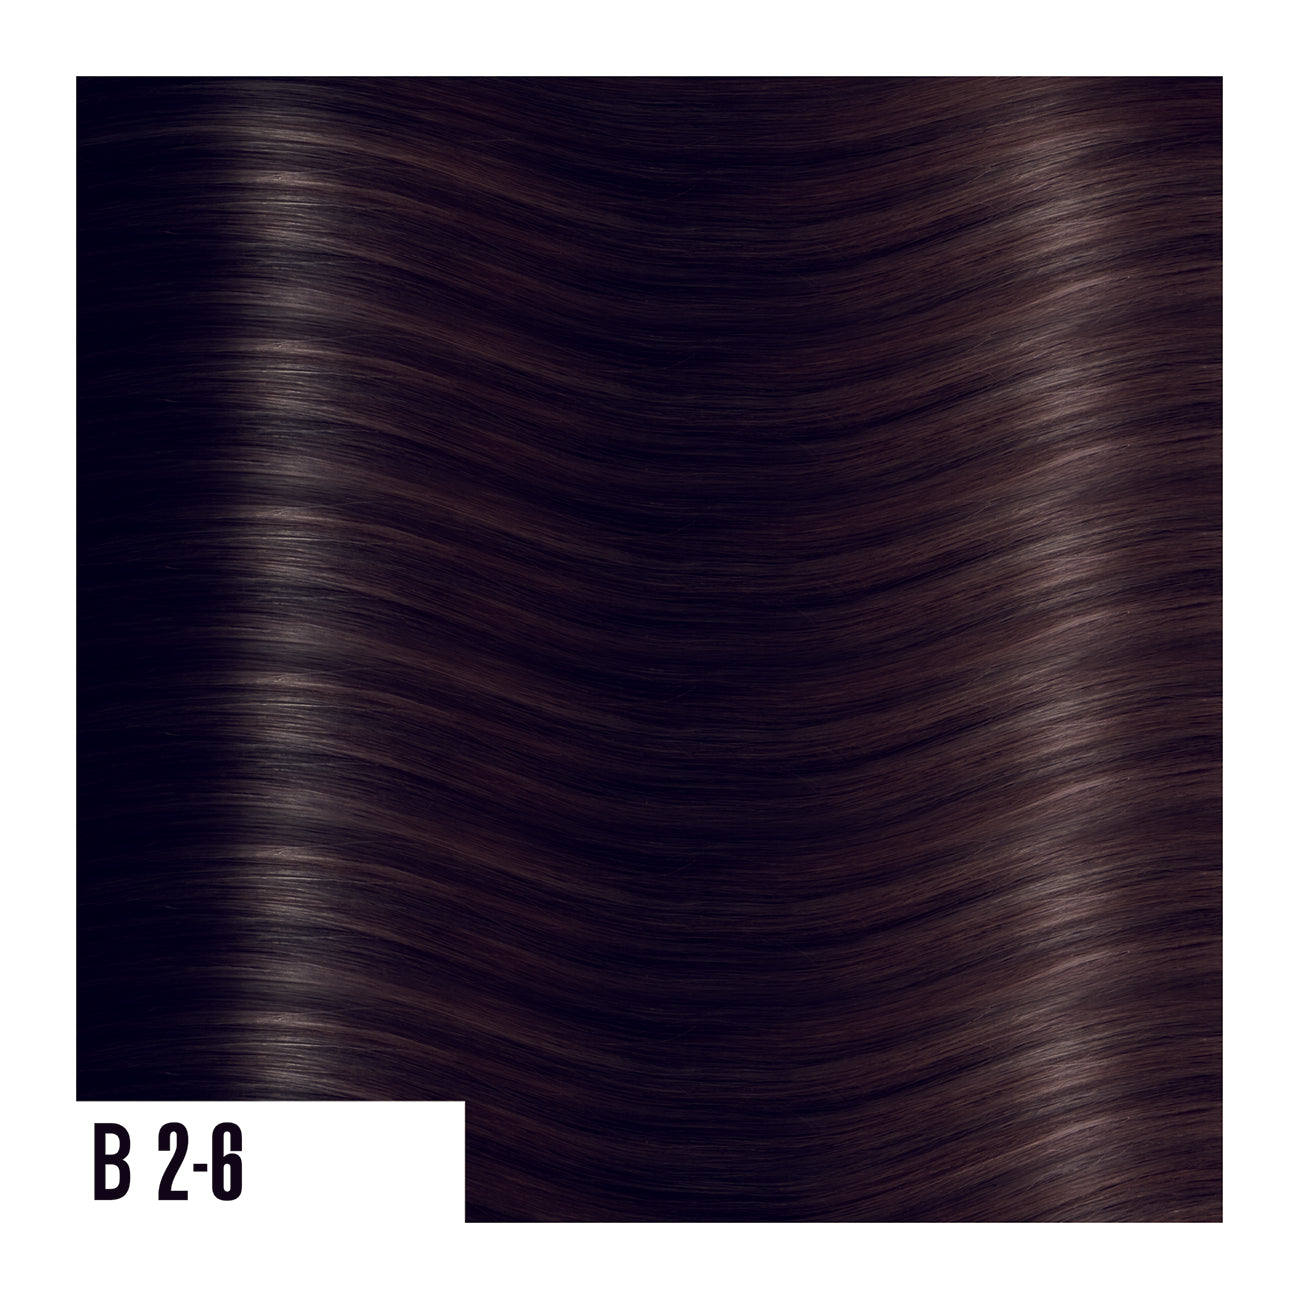 Keratin Extensions Blend of dark brown and light brown - Balayage colors are a perfect combination of natural colored roots that blends into highlighted ends.